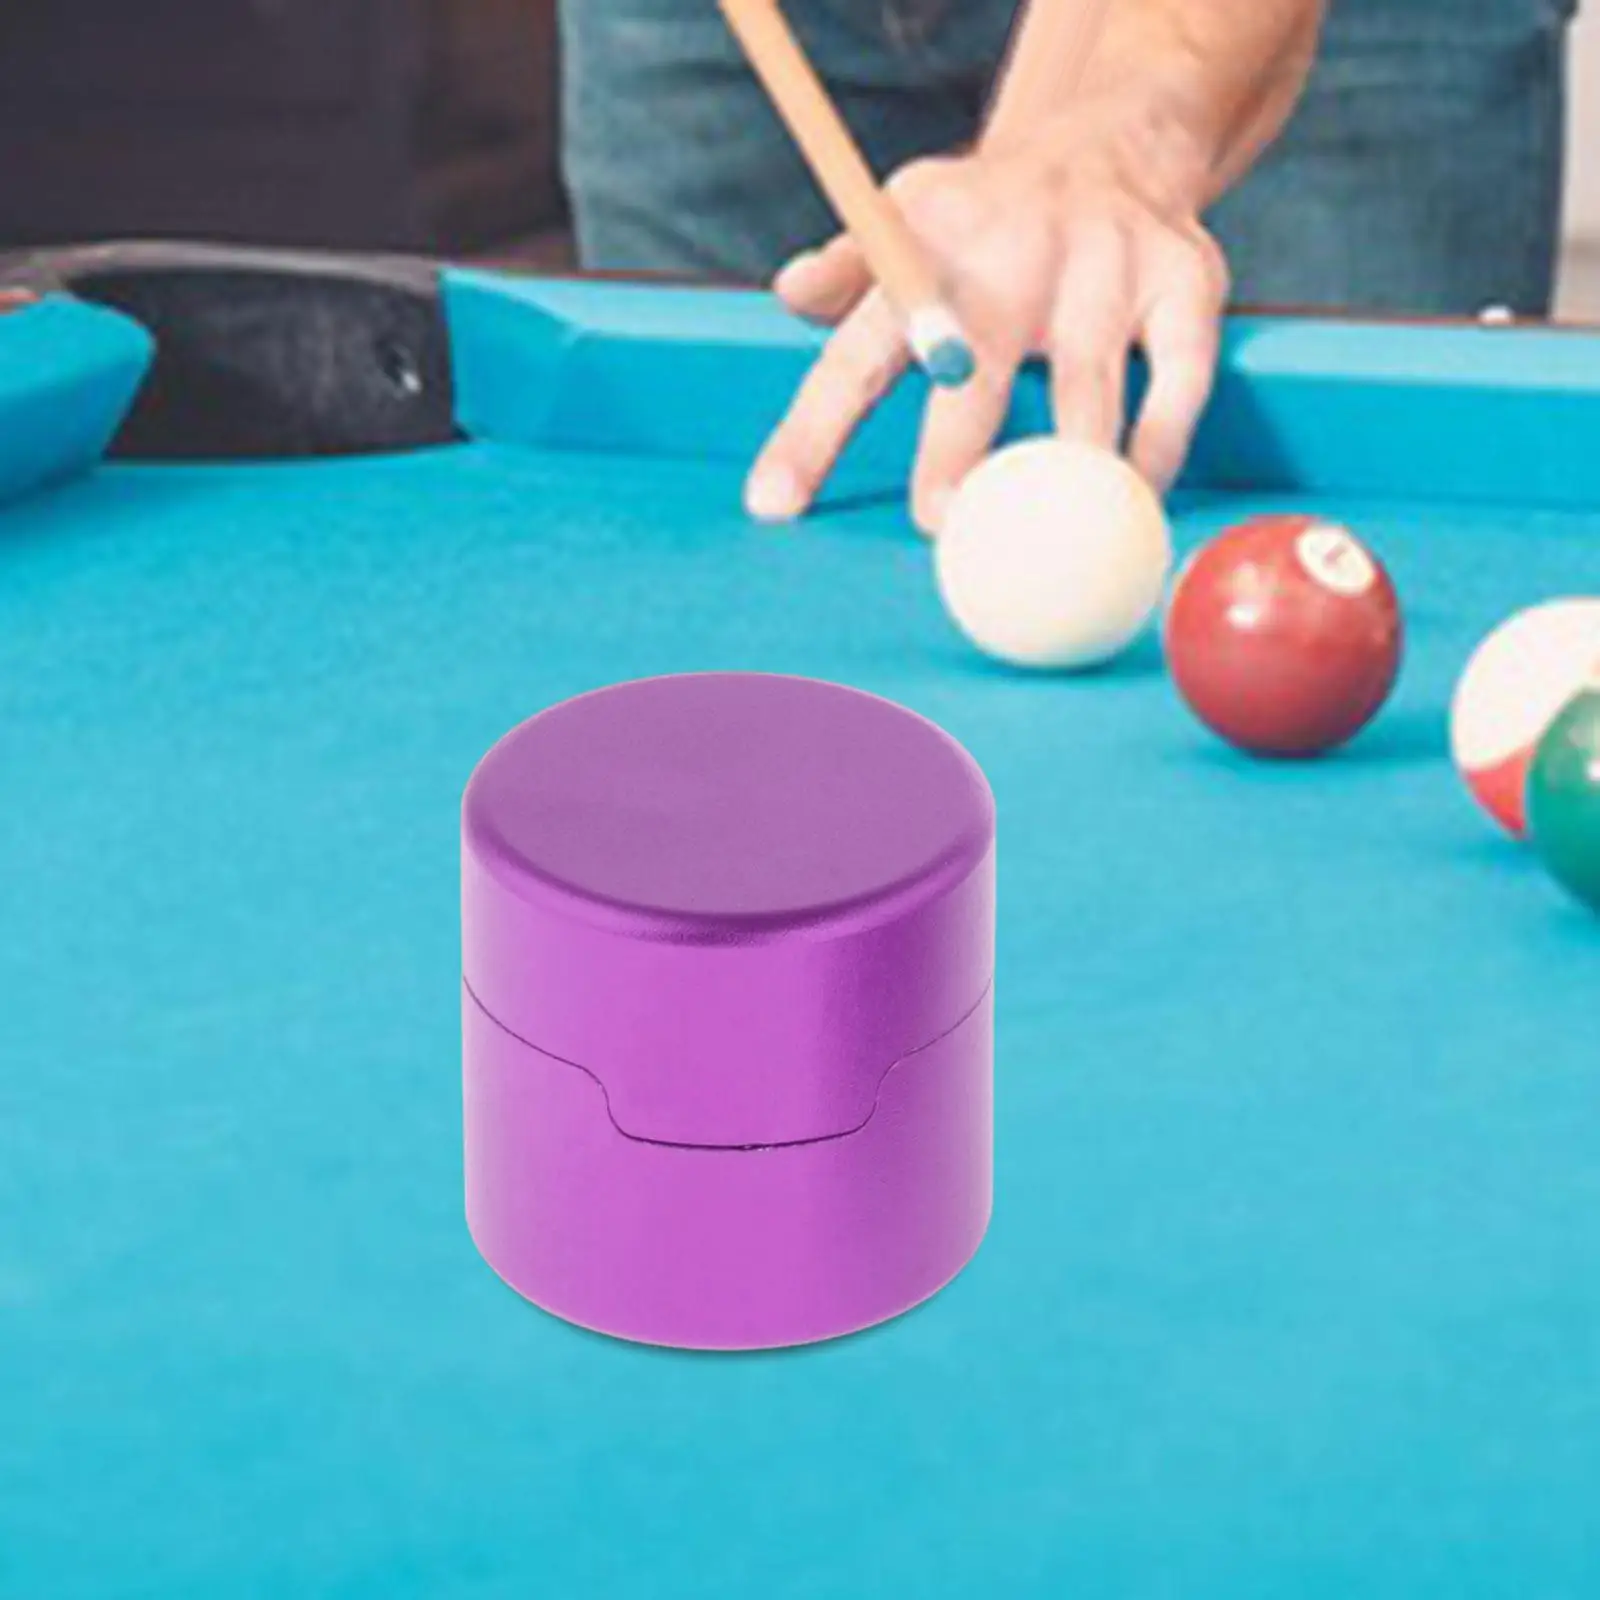 Pool Cue Chalk Holder Easy to Carry Carrier Case Cup Box Mini Round Shaped Billiards Accessories Chalk Holder Practical Tool